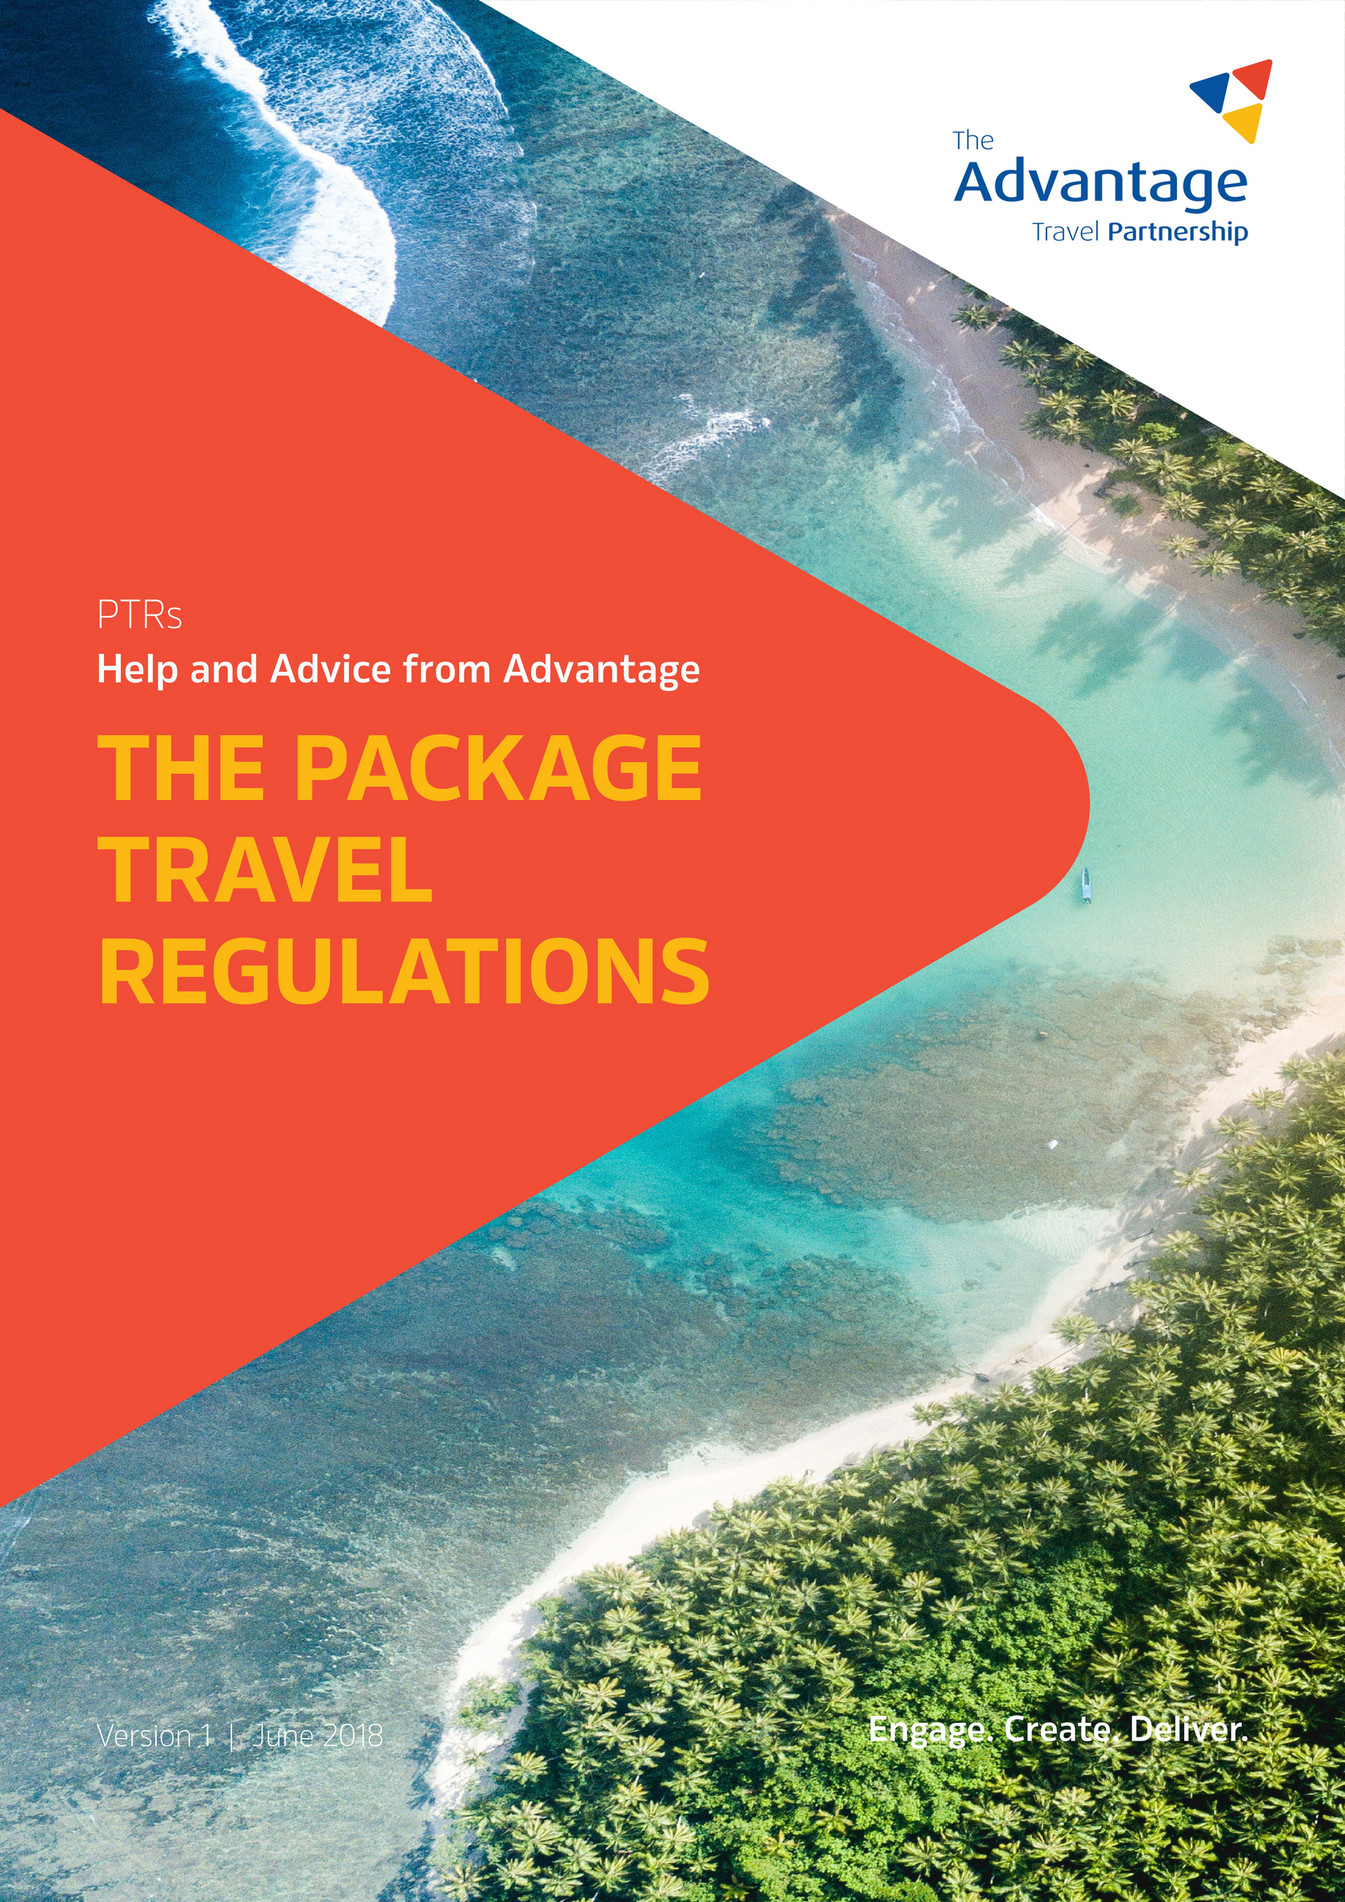 what are the package travel regulations